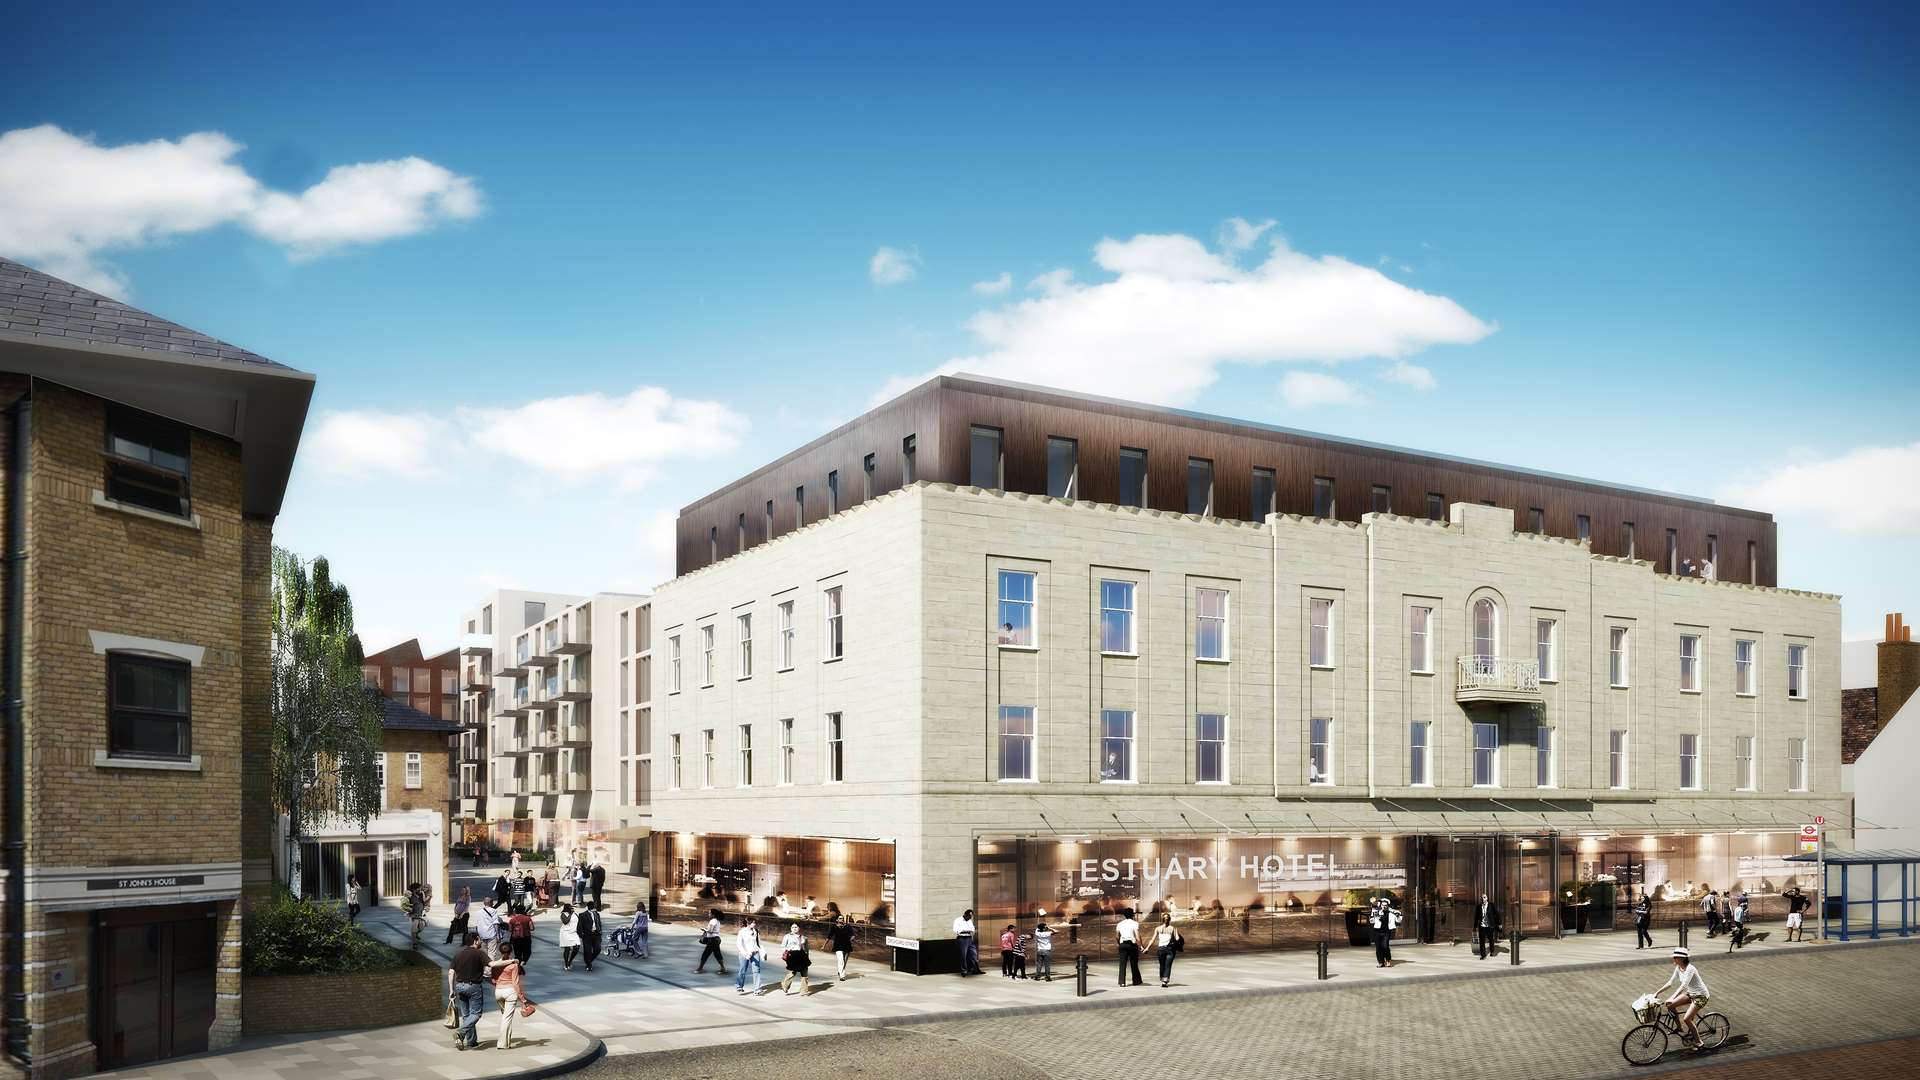 The vision for the old Co-op site